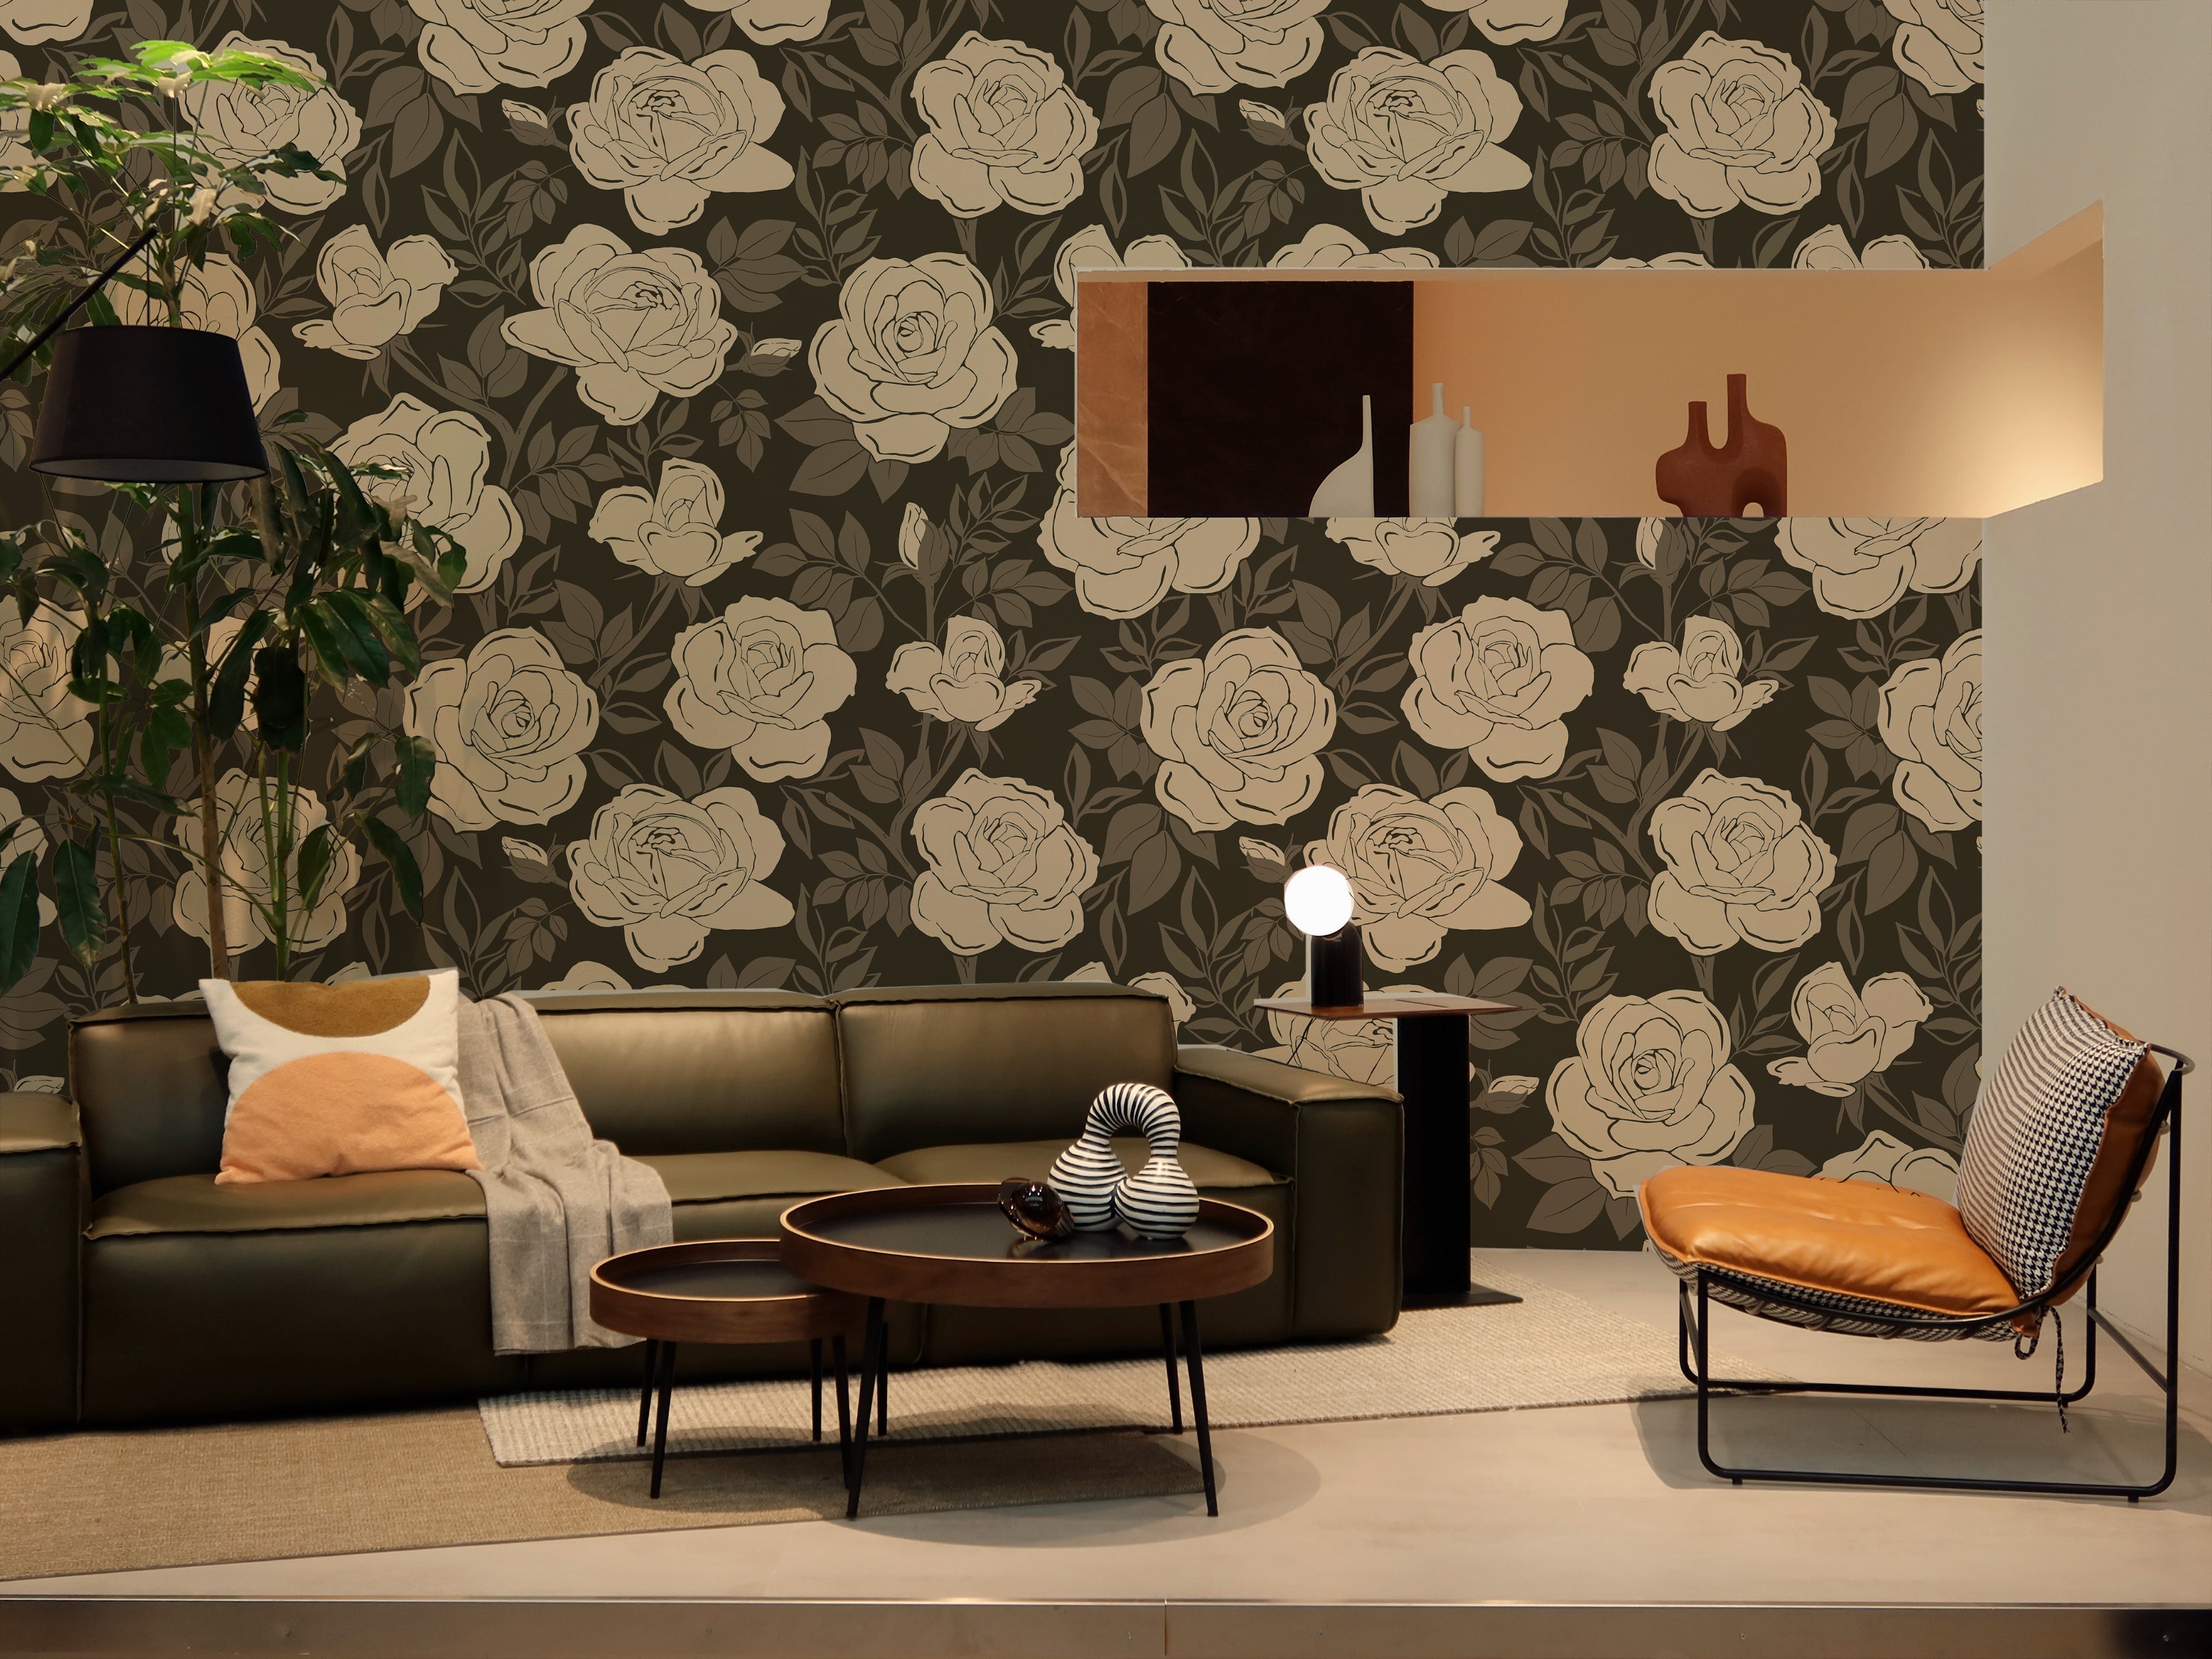 Modern living room featuring a large, elegant floral wallpaper with cream roses on a dark gray background. The space includes a dark leather sofa, designer chairs, and wood accent furniture, creating a sophisticated and inviting atmosphere.